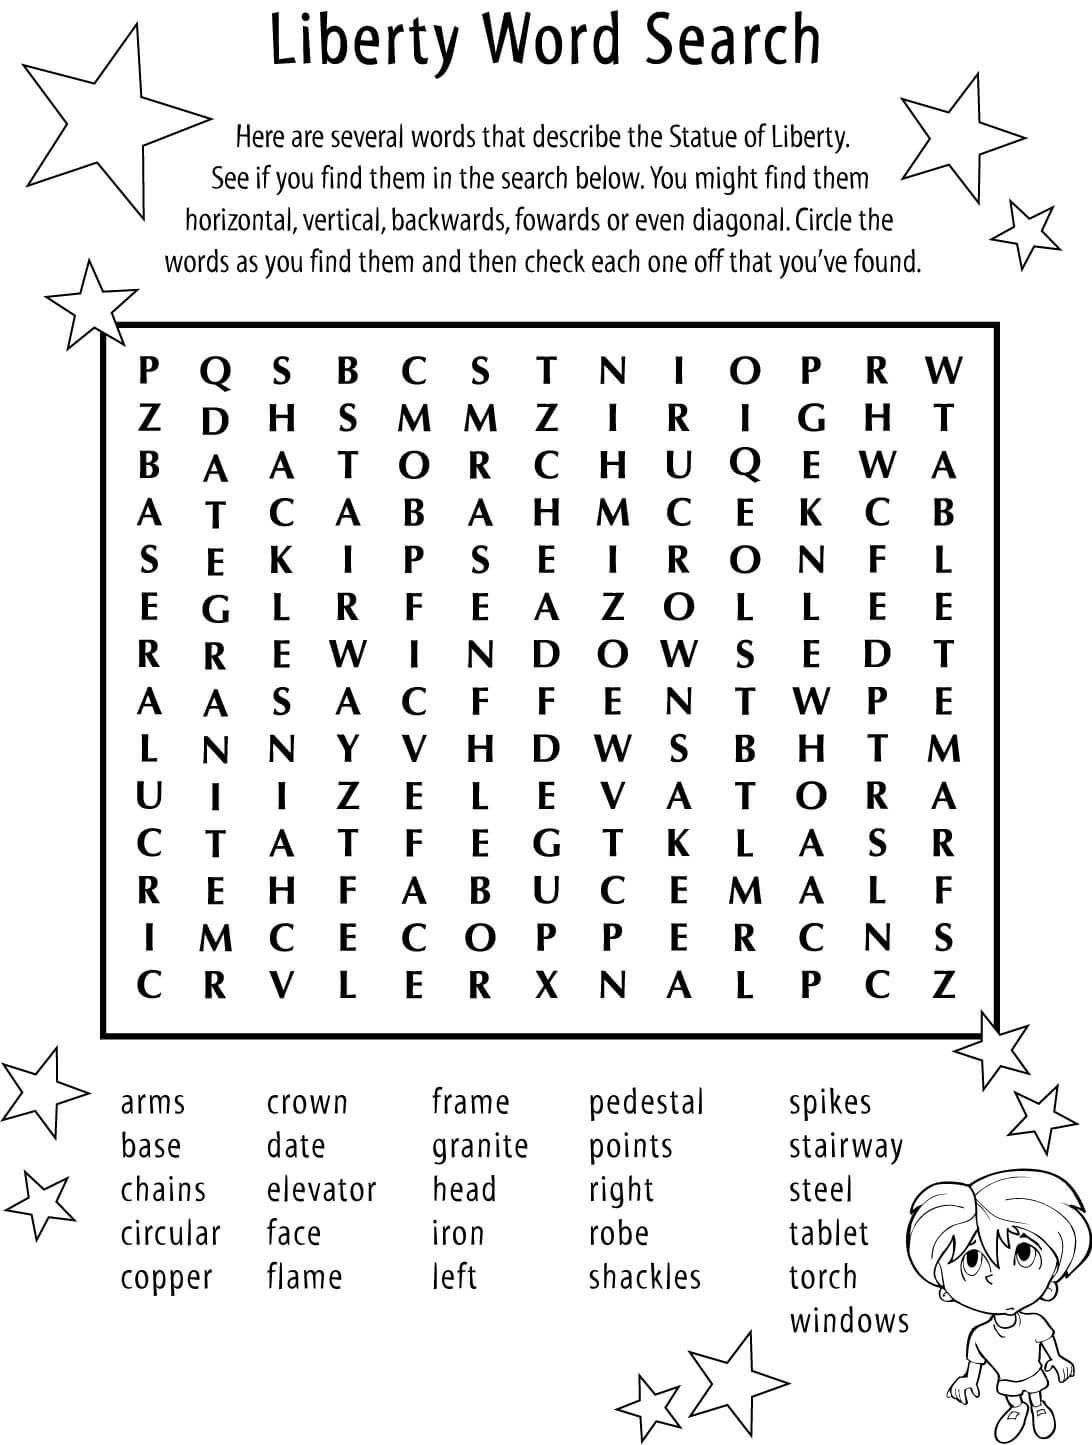 Statue of Liberty Word Search for Kids